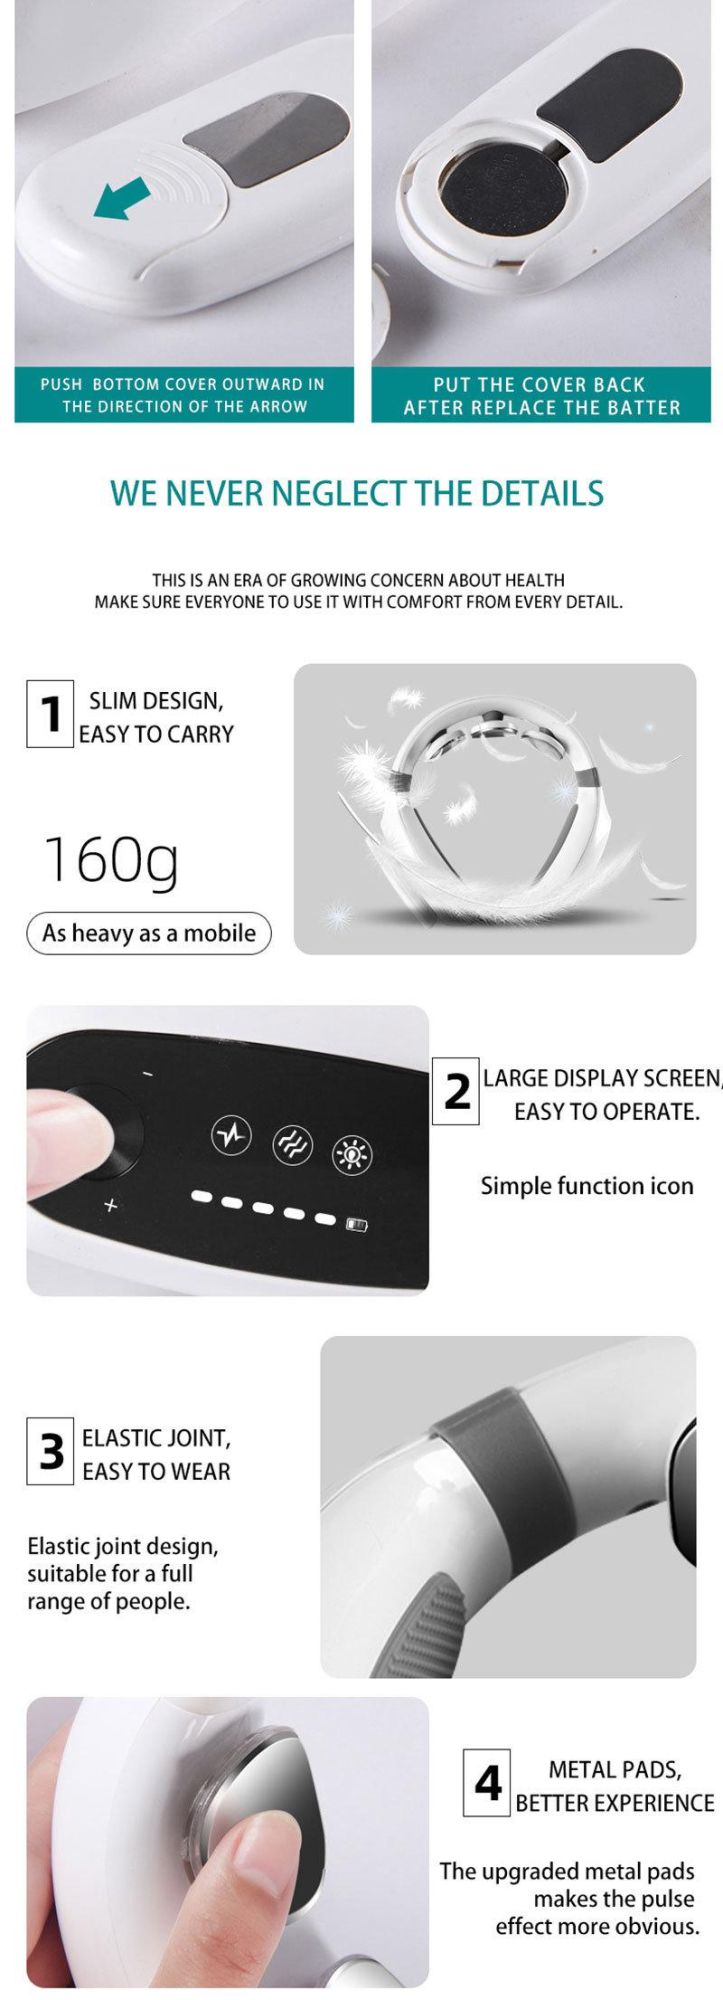 Hezheng Electric Pulse Heating U Shaped Cordless Electric Travel Neck Vibration Massager for Home, Office, Airplane